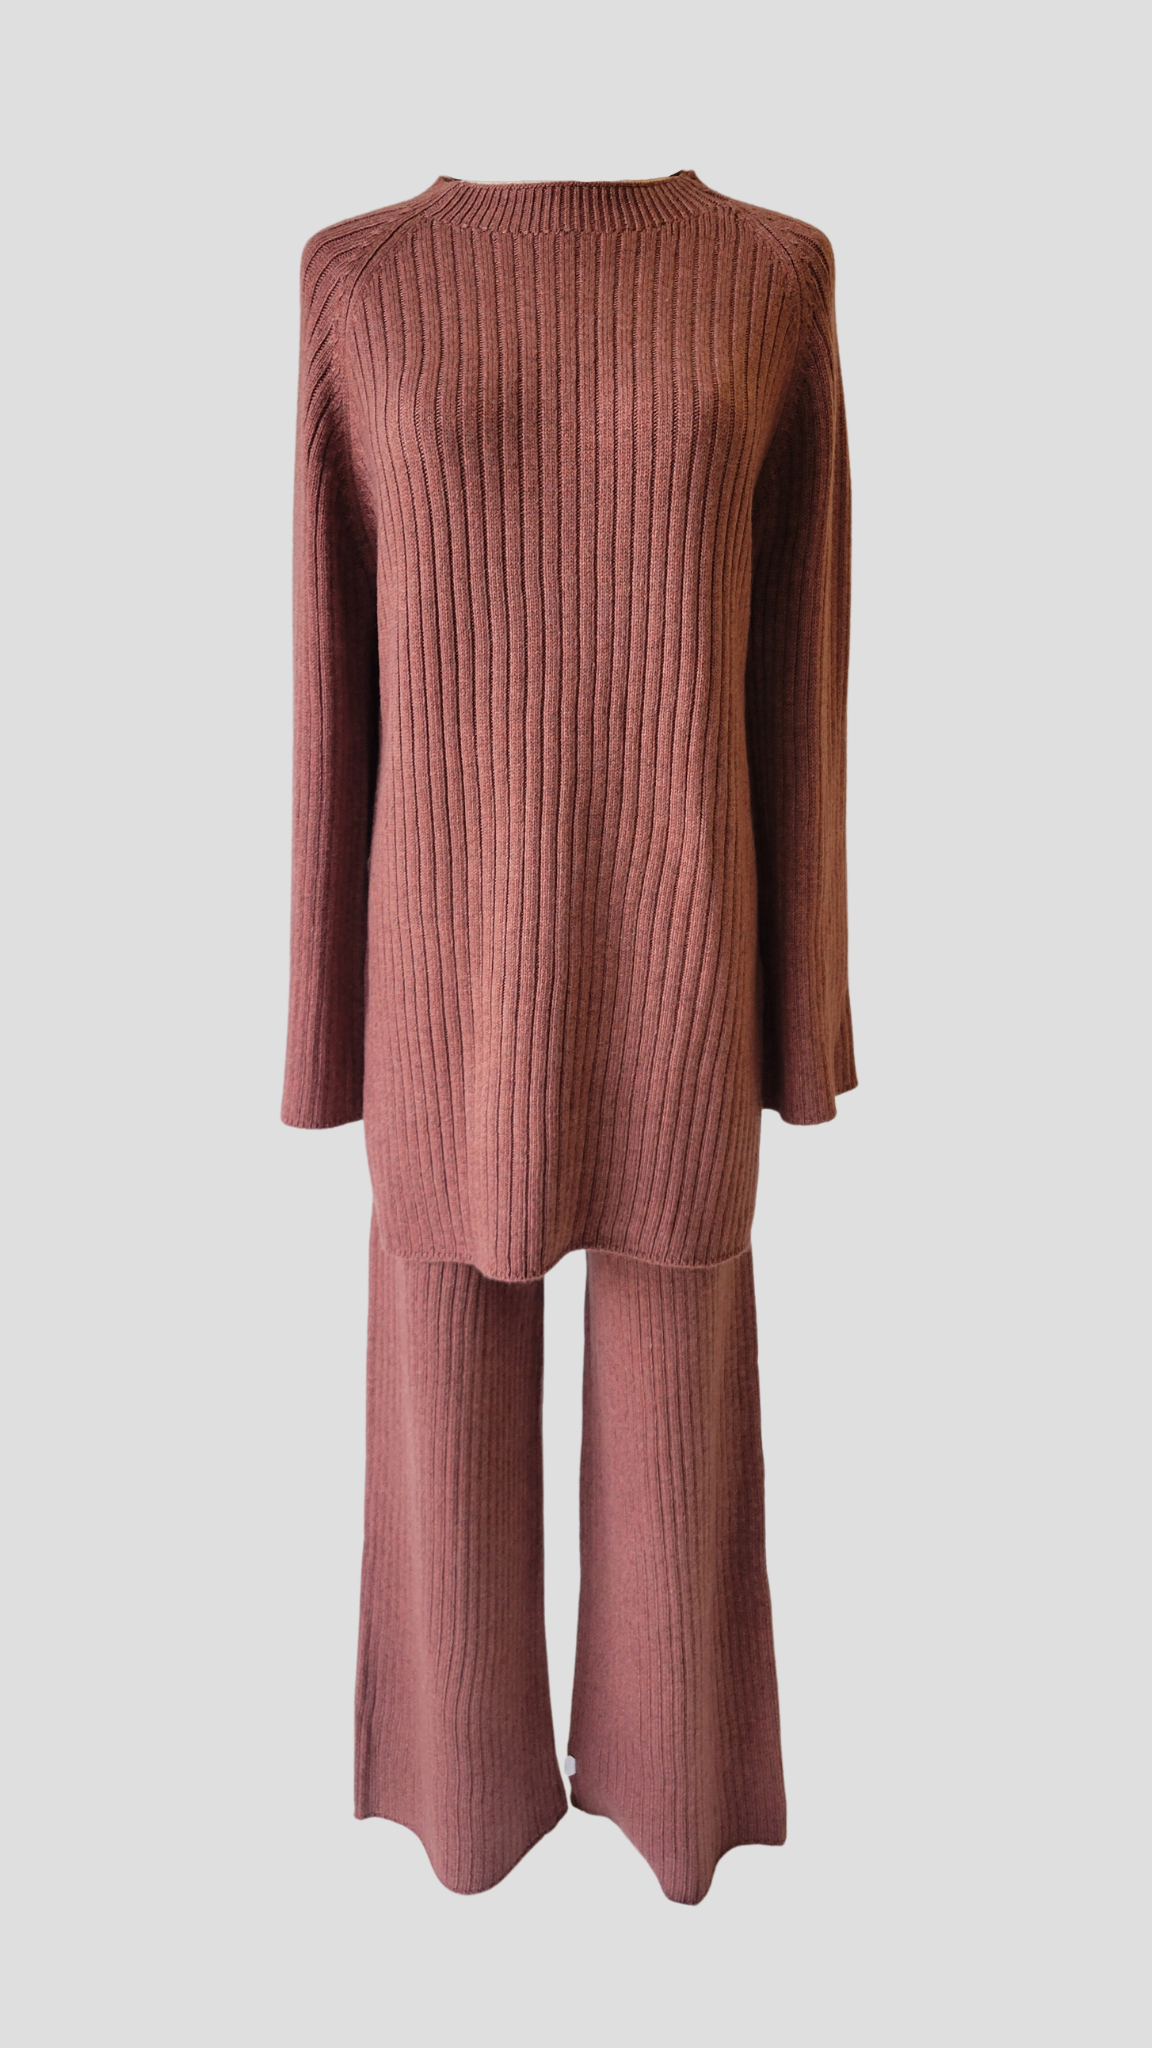 A chic two-piece knit co-ord set in 'Spice', a copper red colour. The set includes a comfy sweater with a relaxed fit and matching knit pants. Perfect for a stylish and cozy look.